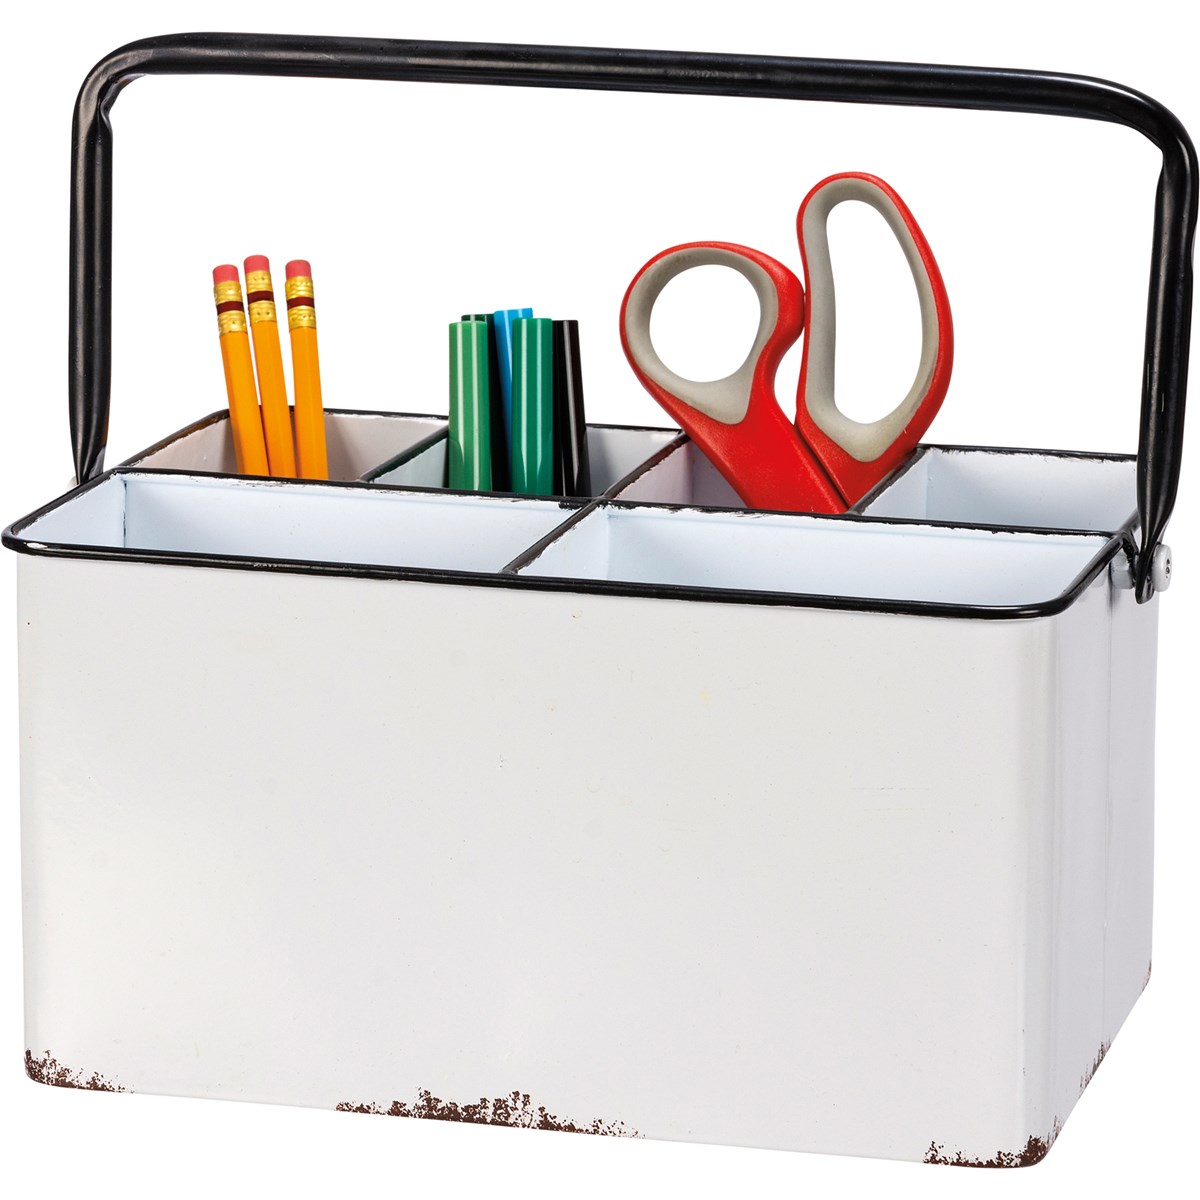 Six Section Caddy, White,
SKU: 114164
A metal caddy from our Farmhouse Collection featuring an enamel-like finish and distressed details for added interest. Caddy features two large and four small compartments for optimal organization.
Dimensions:	9.50 x 5 x 6.25
Material:	Metal
UPC:	190134141646
Artist:	Primitives by Kathy